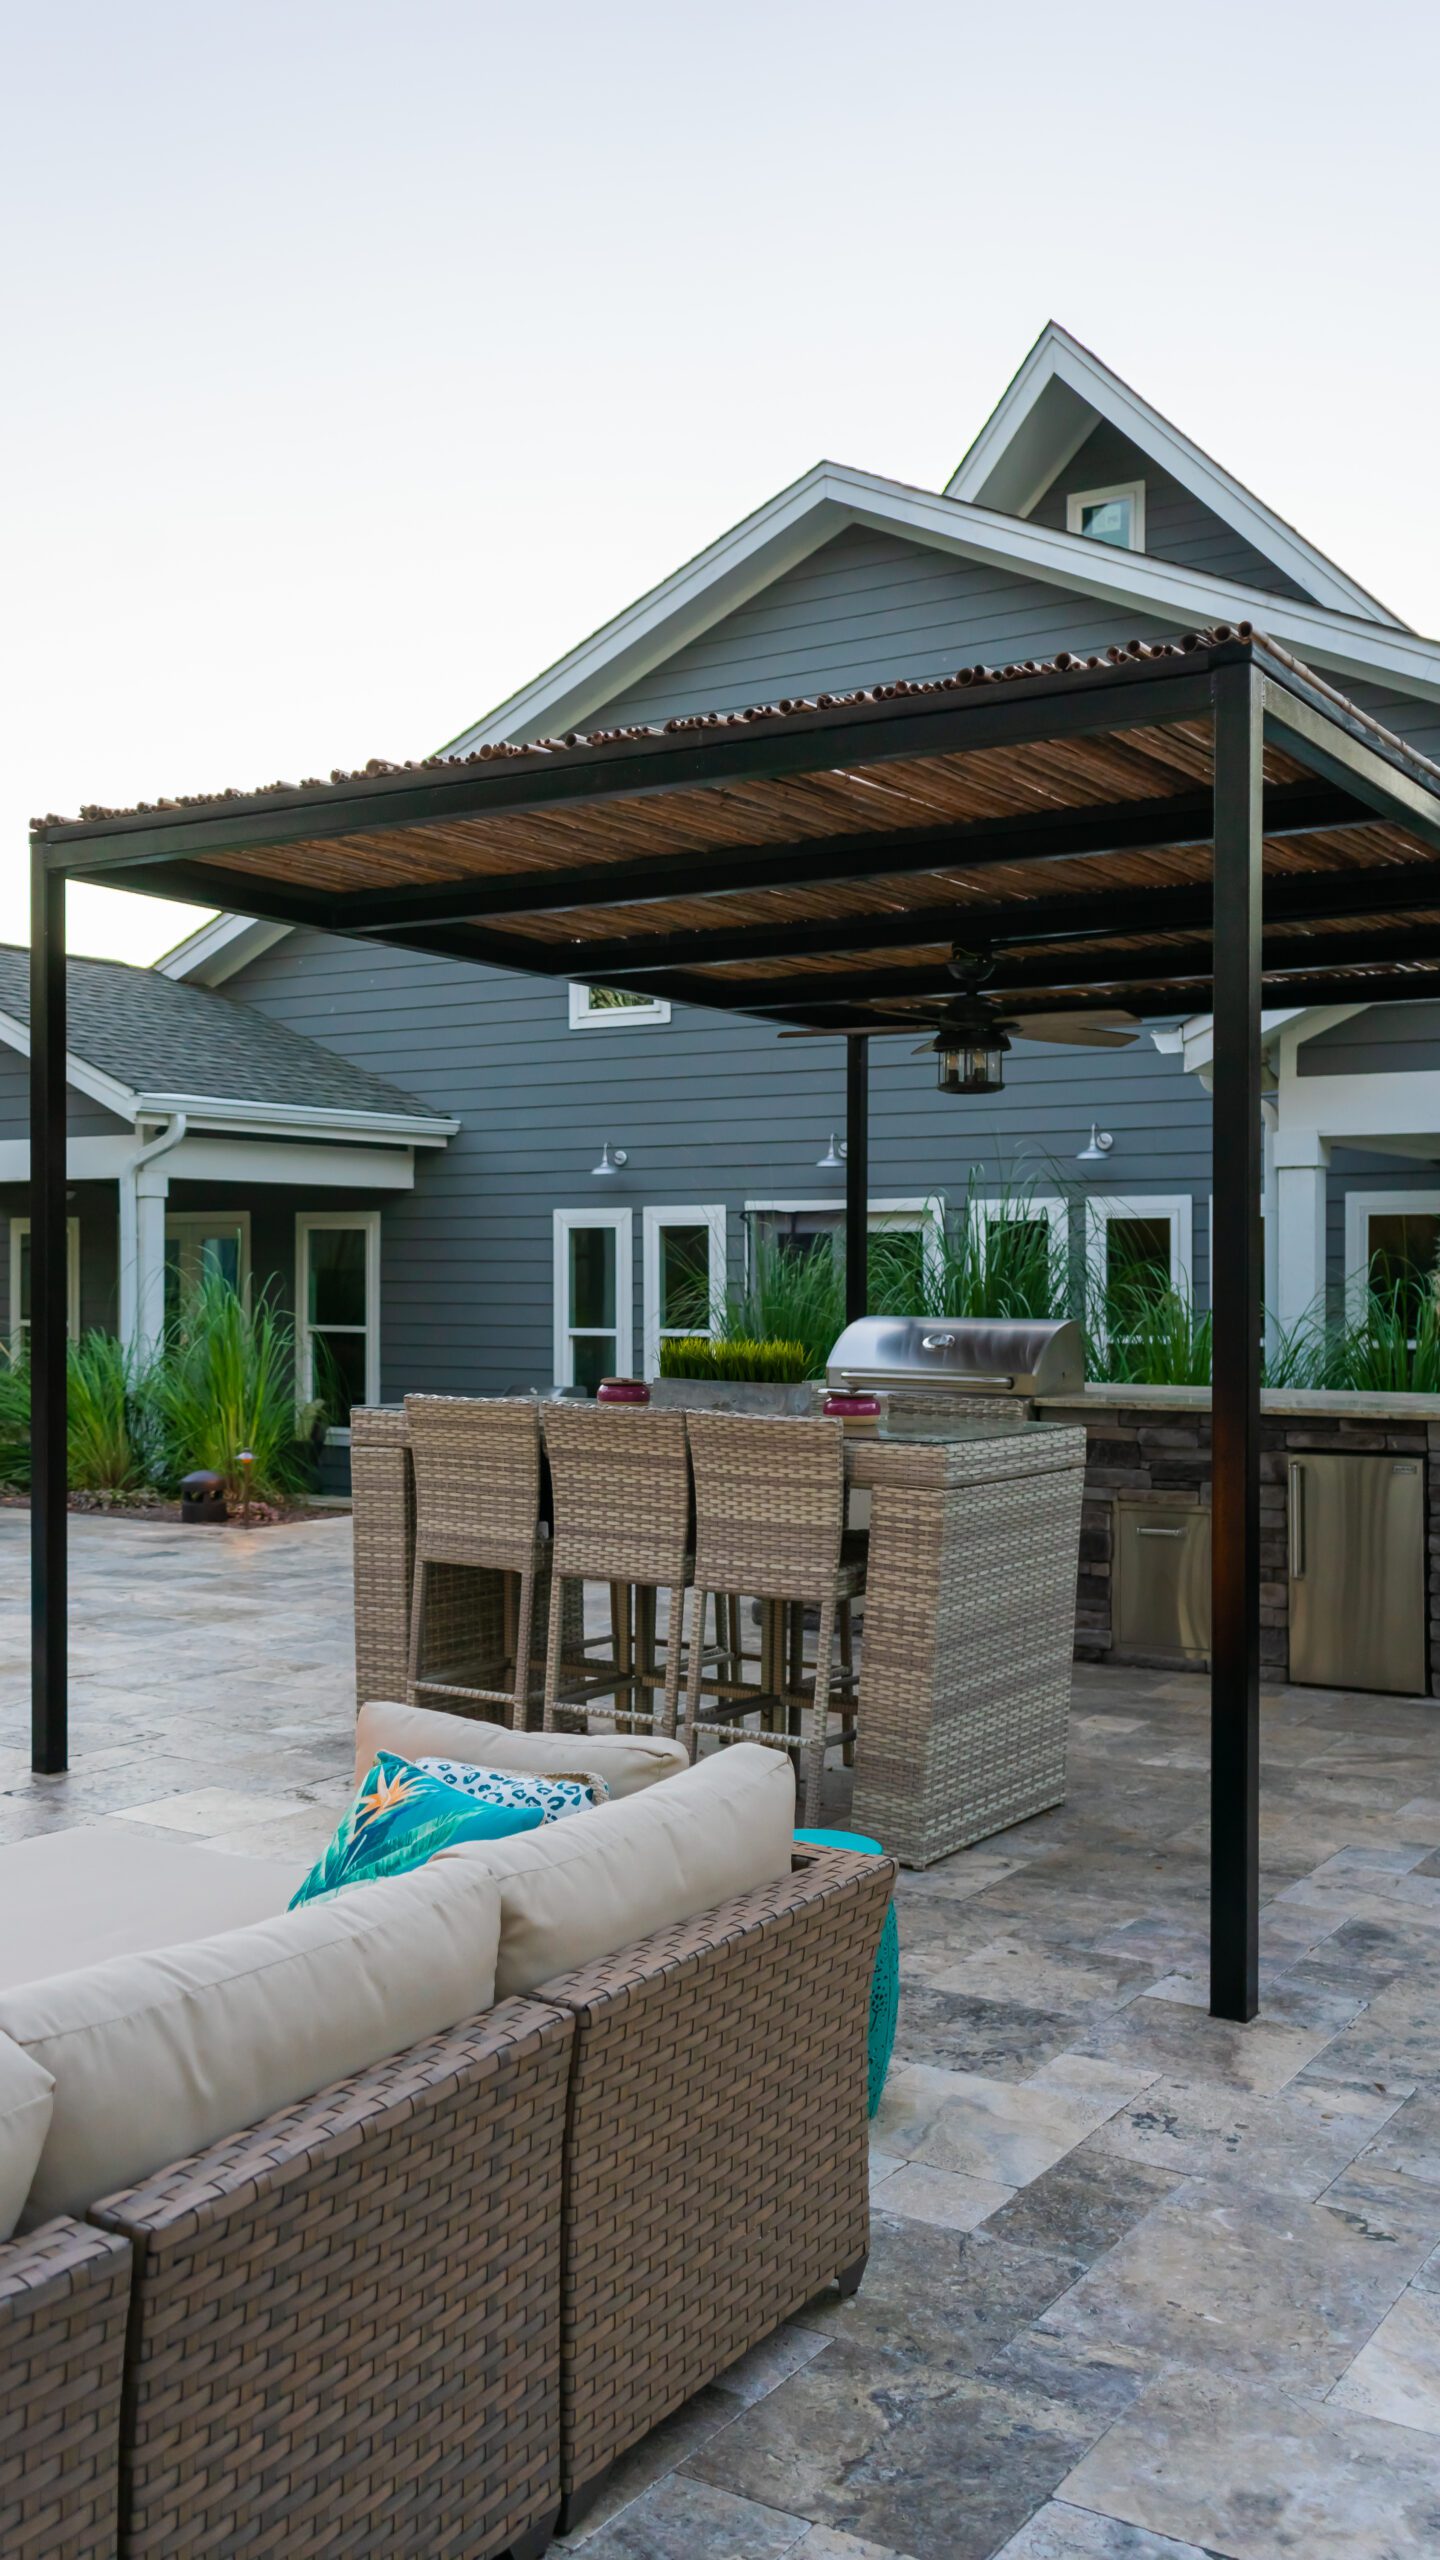 Bamboo Fencing - Luxury Landscape, Pool Builders, and Outdoor Living Designs in Nashville, TN